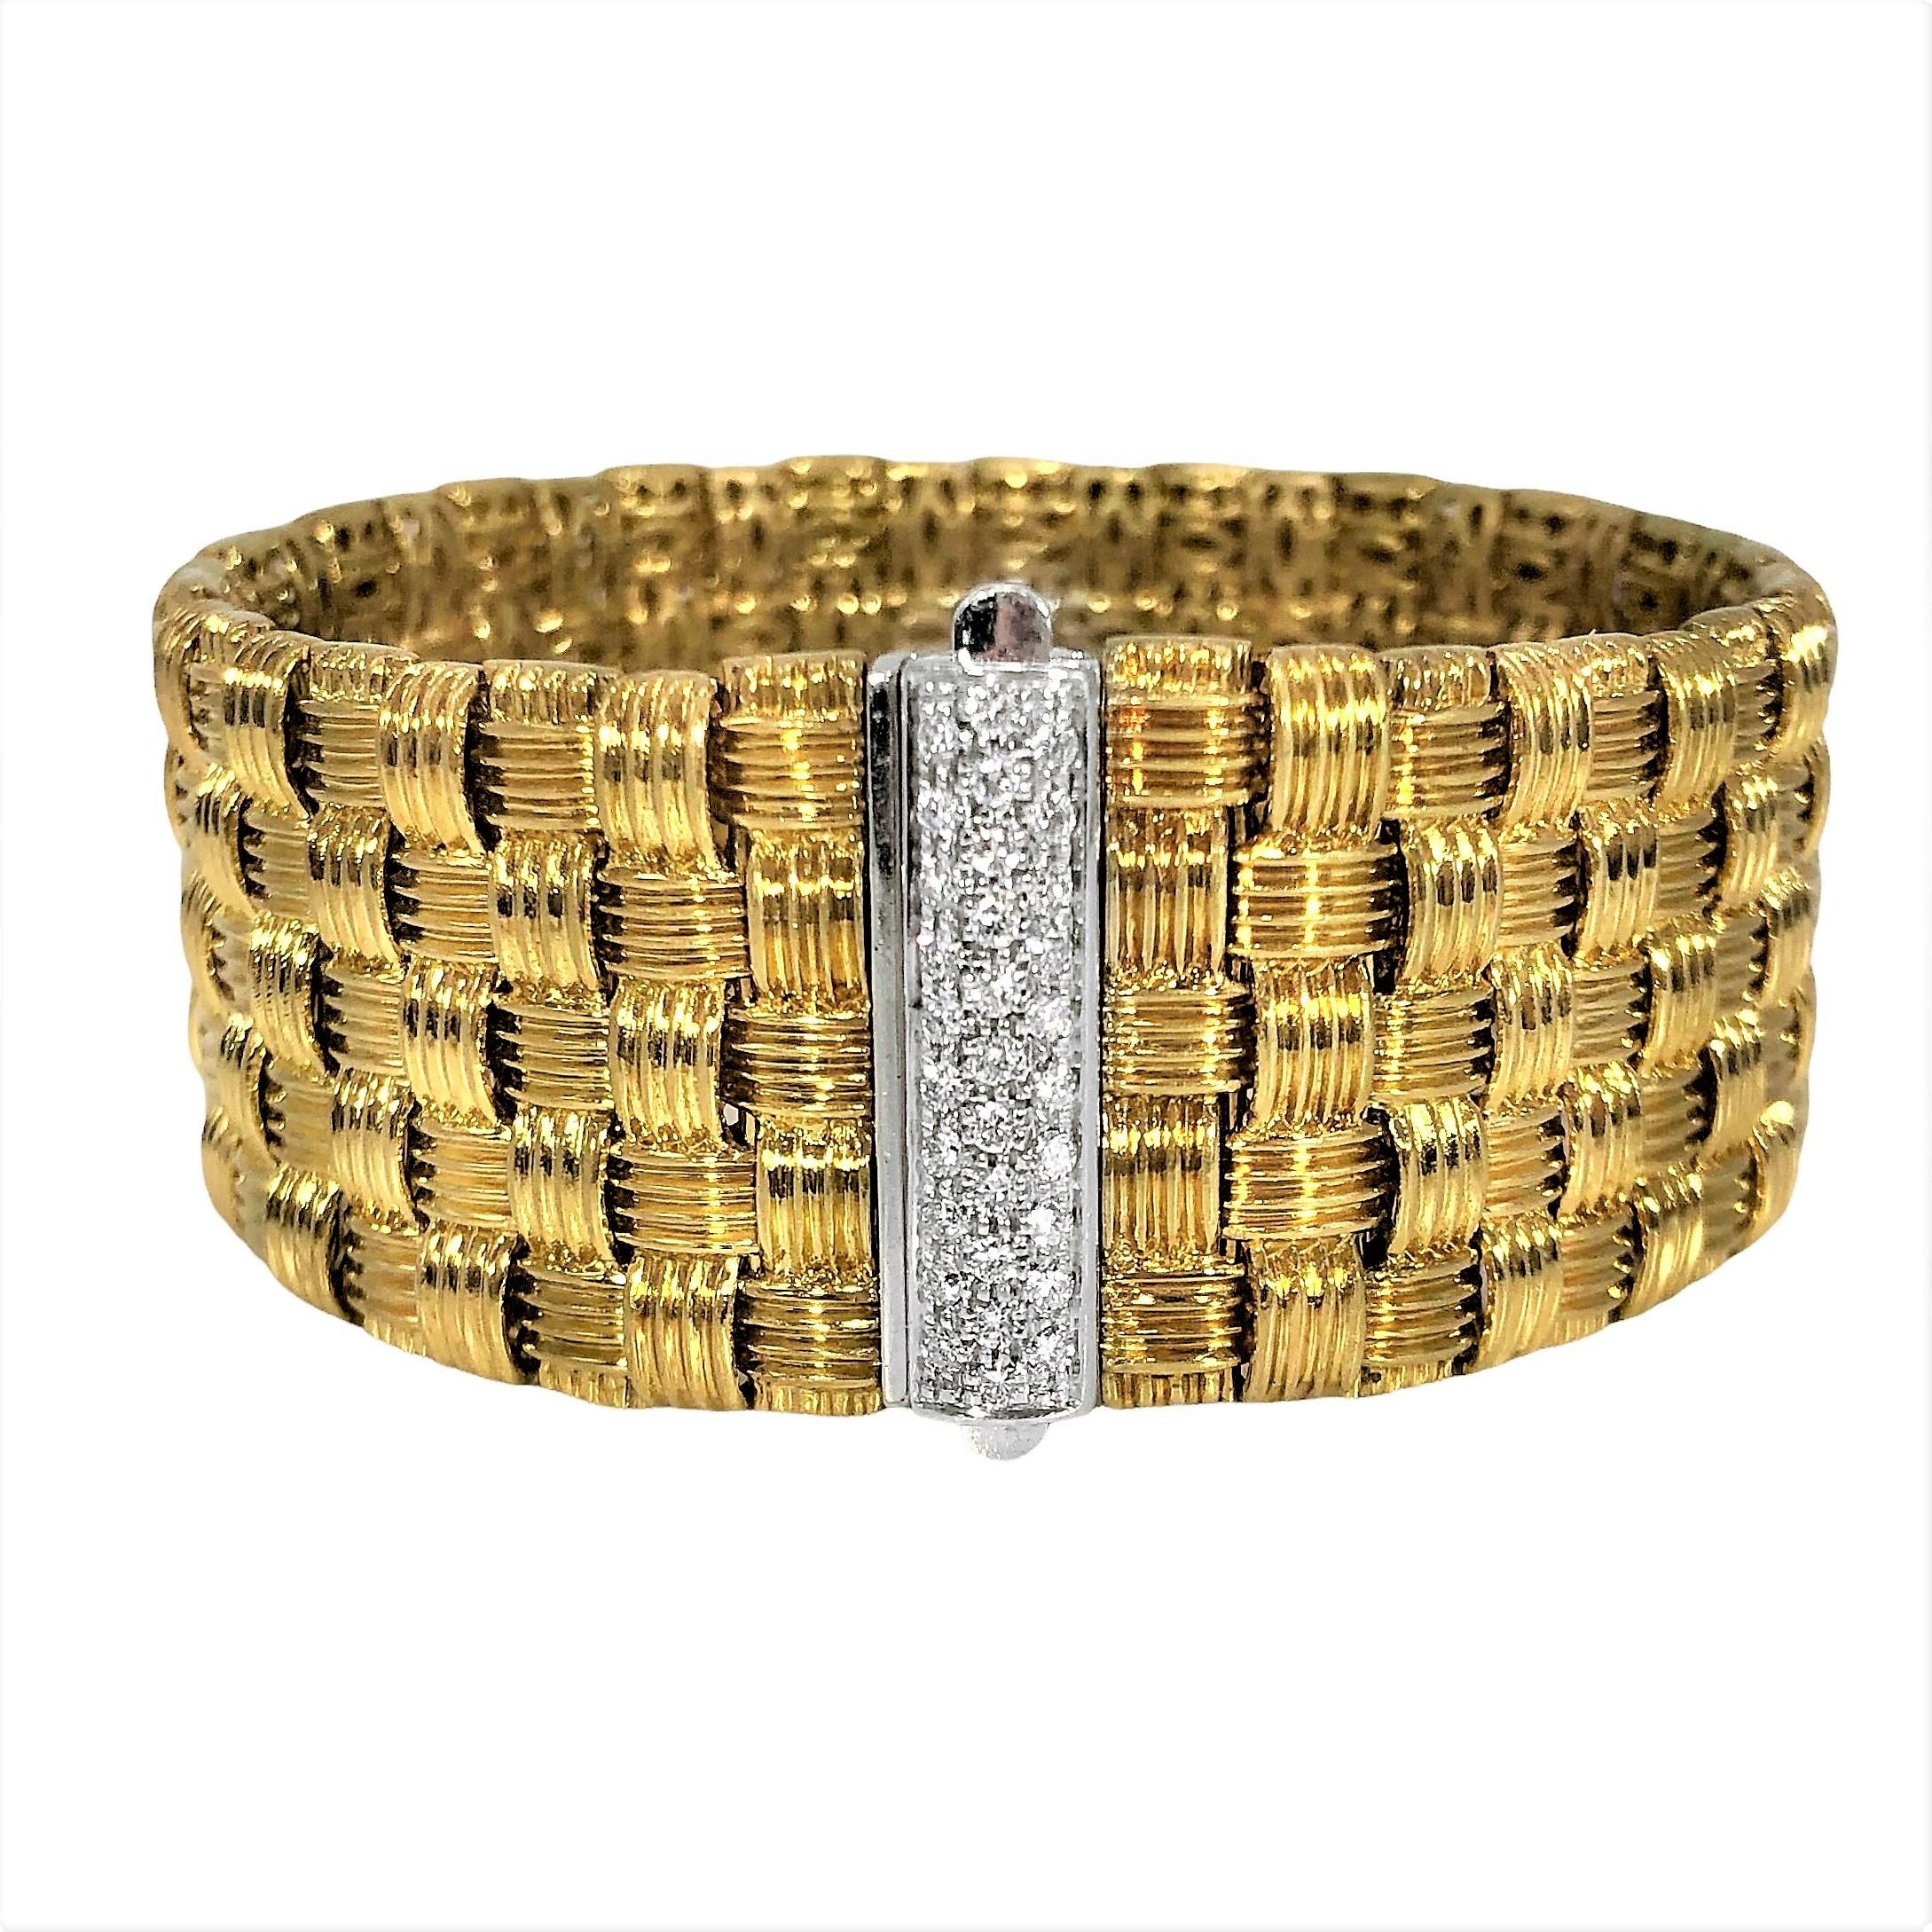 This truly iconic Roberto Coin bracelet is appropriately named Appassionata, for the feelings that it evokes. It is richly textured, excellently detailed, 5 rows wide, and terminates with a white gold clasp pave set with thirty brilliant cut